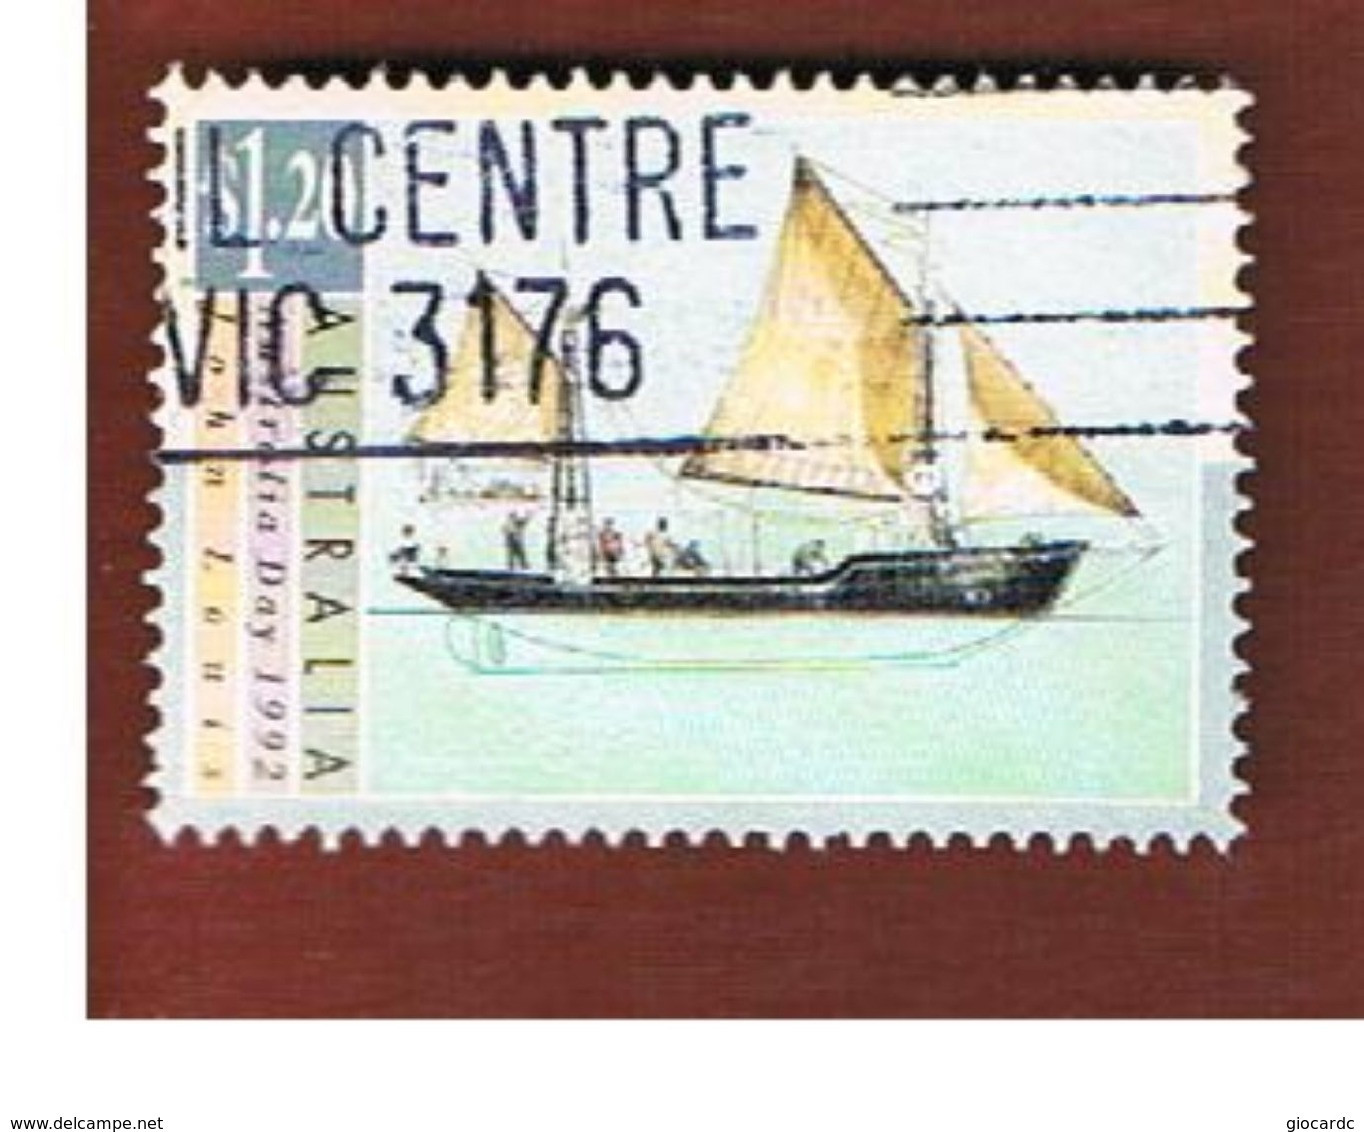 AUSTRALIA  -  SG 1336  -      1992 SHIPS: J. LUIS        -       USED - Used Stamps